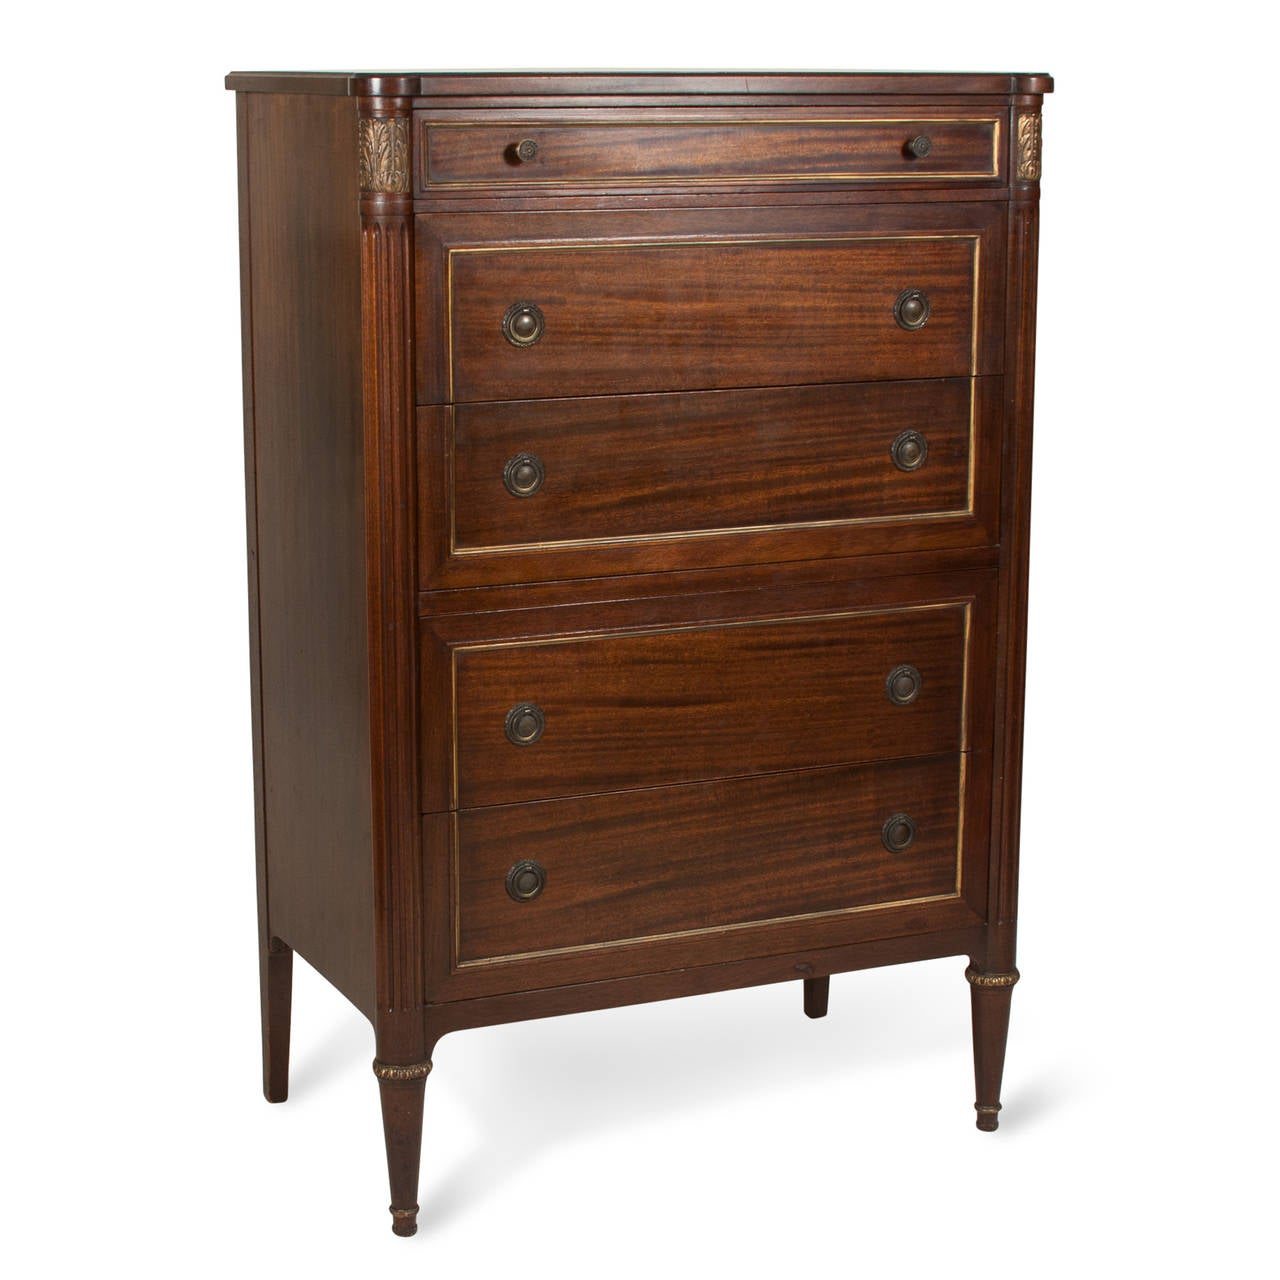 Art Nouveau five-drawer tall chest in mahogany, gilt decorated drawer faces, gilt floral corner elements, fluted column, tapered legs, aged brass drawer pulls, by Widdicomb, American, circa 1910. 33 x 20 inches, height 62 in. (Item #2225)